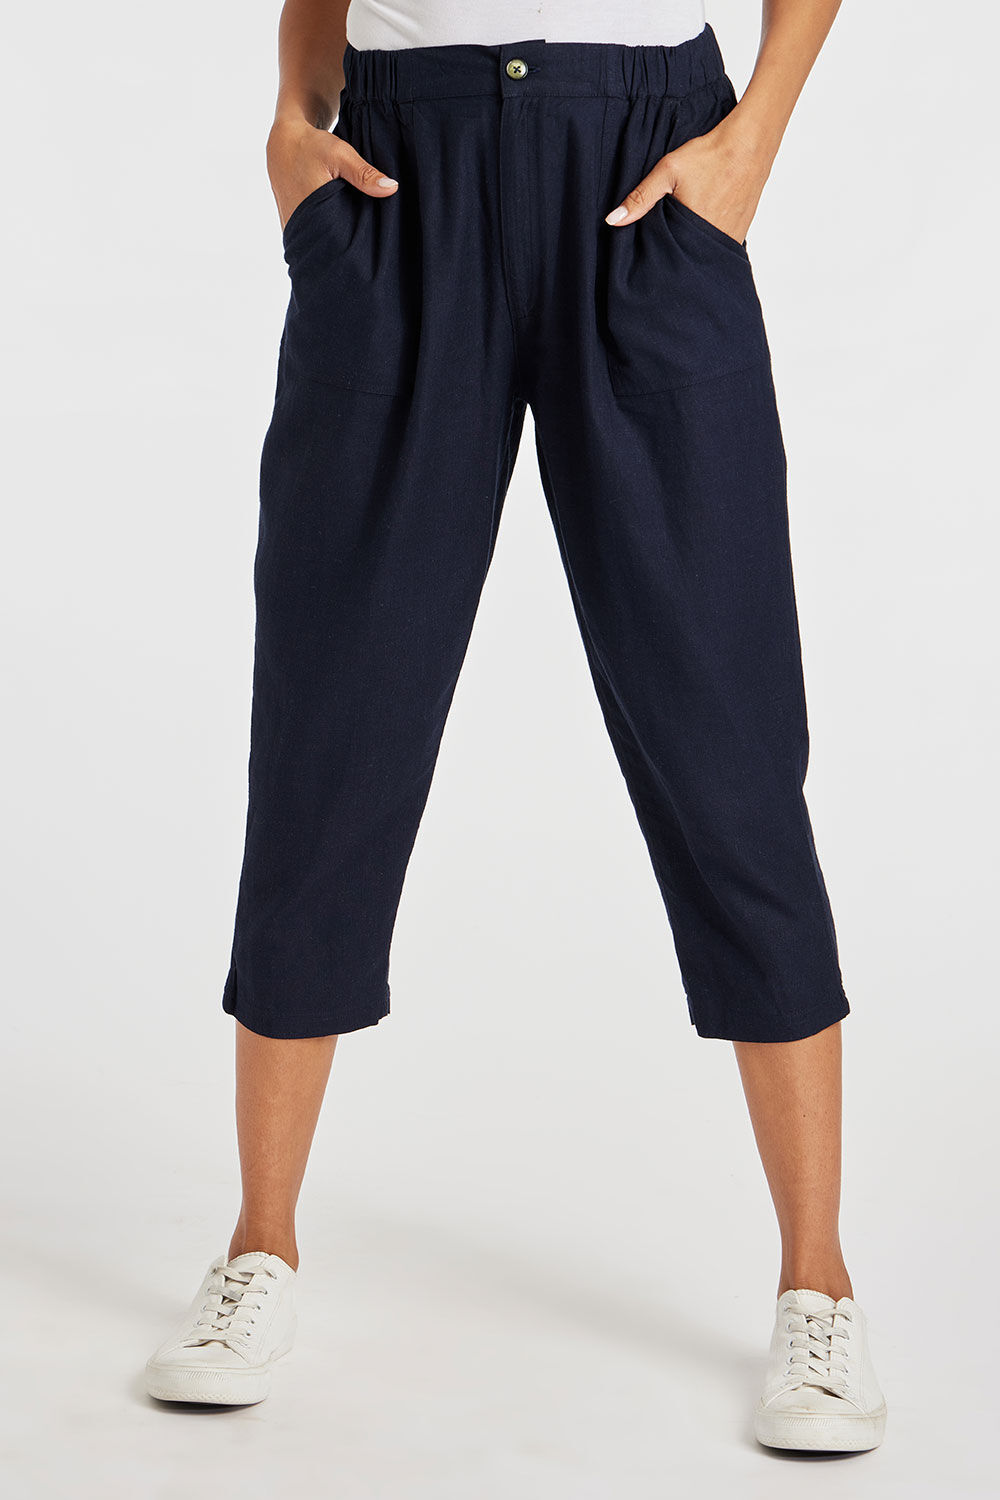 Bonmarche Navy Tapered Cropped Linen Trousers With Button Detail, Size: 10 - Summer Trousers